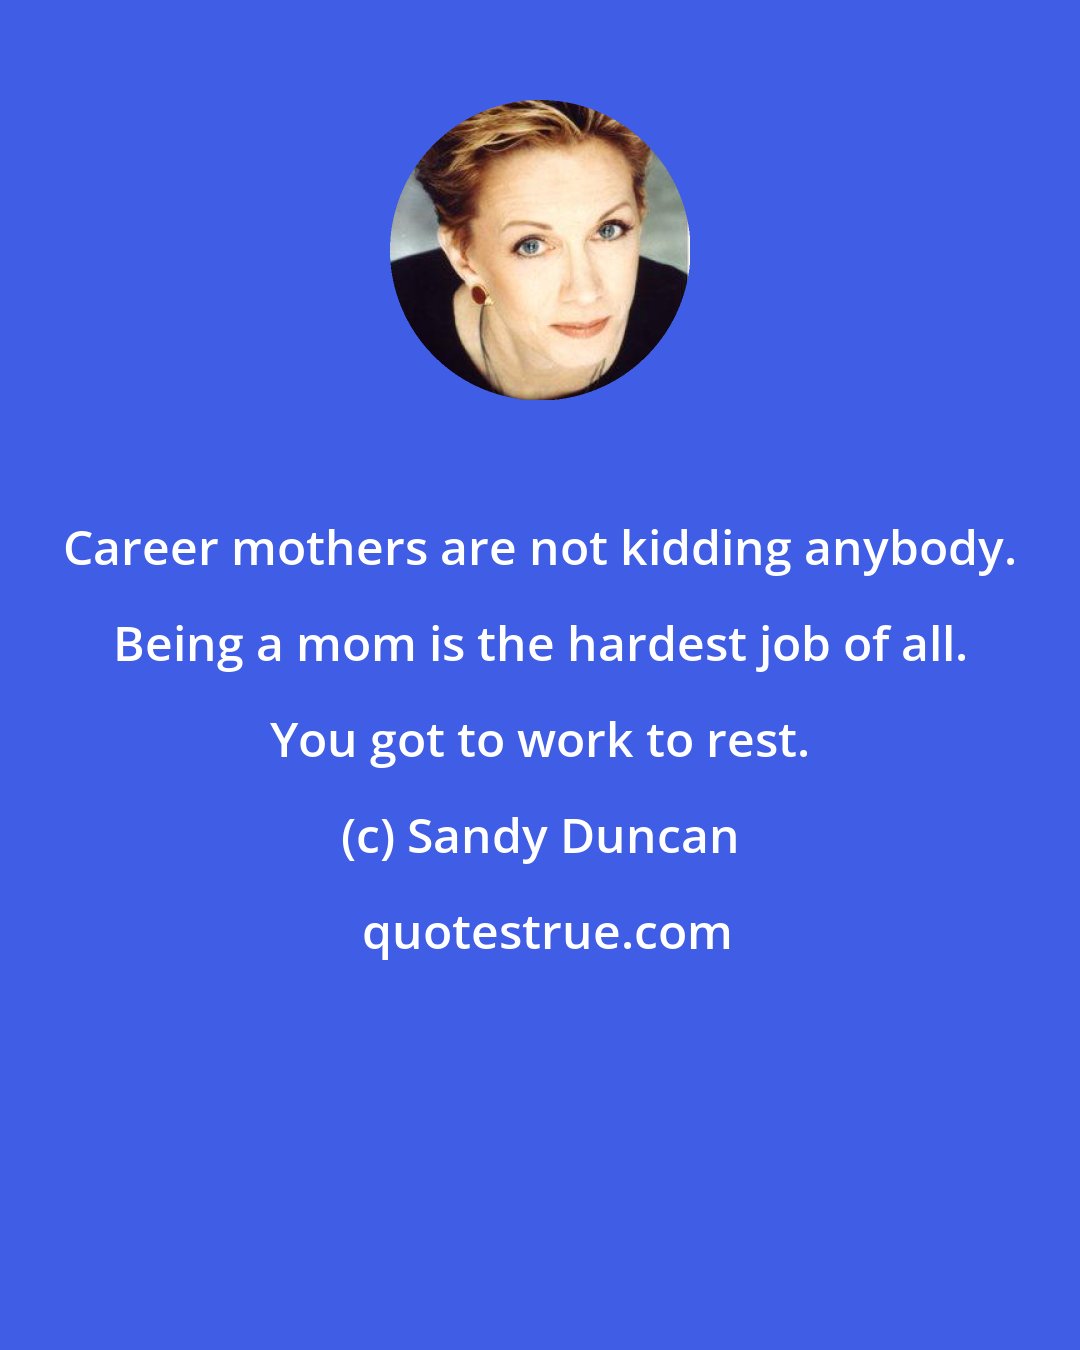 Sandy Duncan: Career mothers are not kidding anybody. Being a mom is the hardest job of all. You got to work to rest.